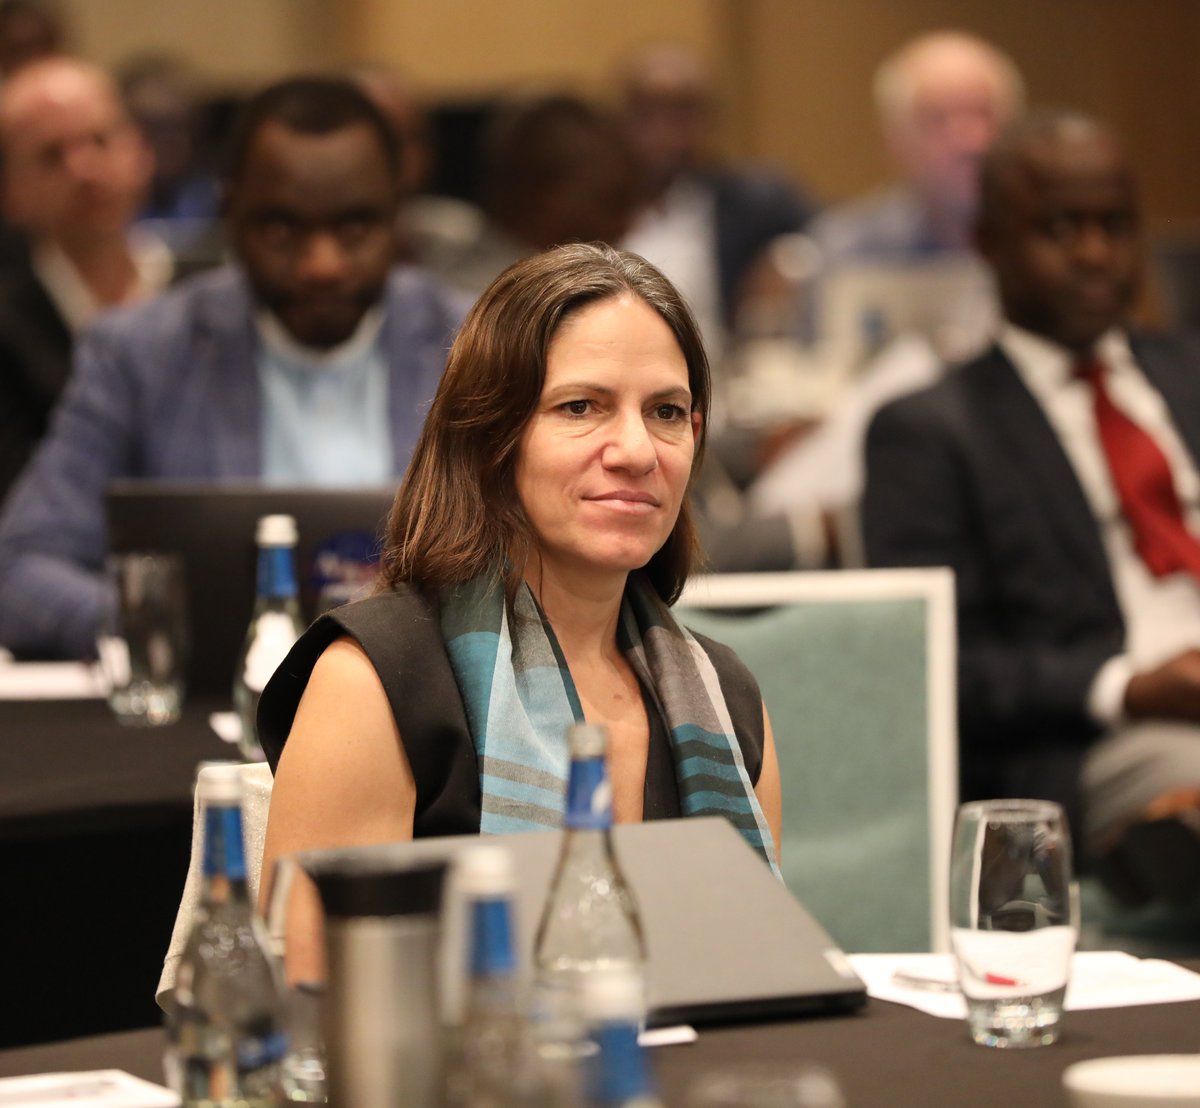 Climate change is impacting children's lives in Rwanda now🌍

Today, at the #ClimateandHealth Expert Workshop, @LindseyJulianna commended 🇷🇼's commitment to combat climate change, & emphasized the need for resilient health systems in dealing with climate-related health issues🧑🏾‍⚕️